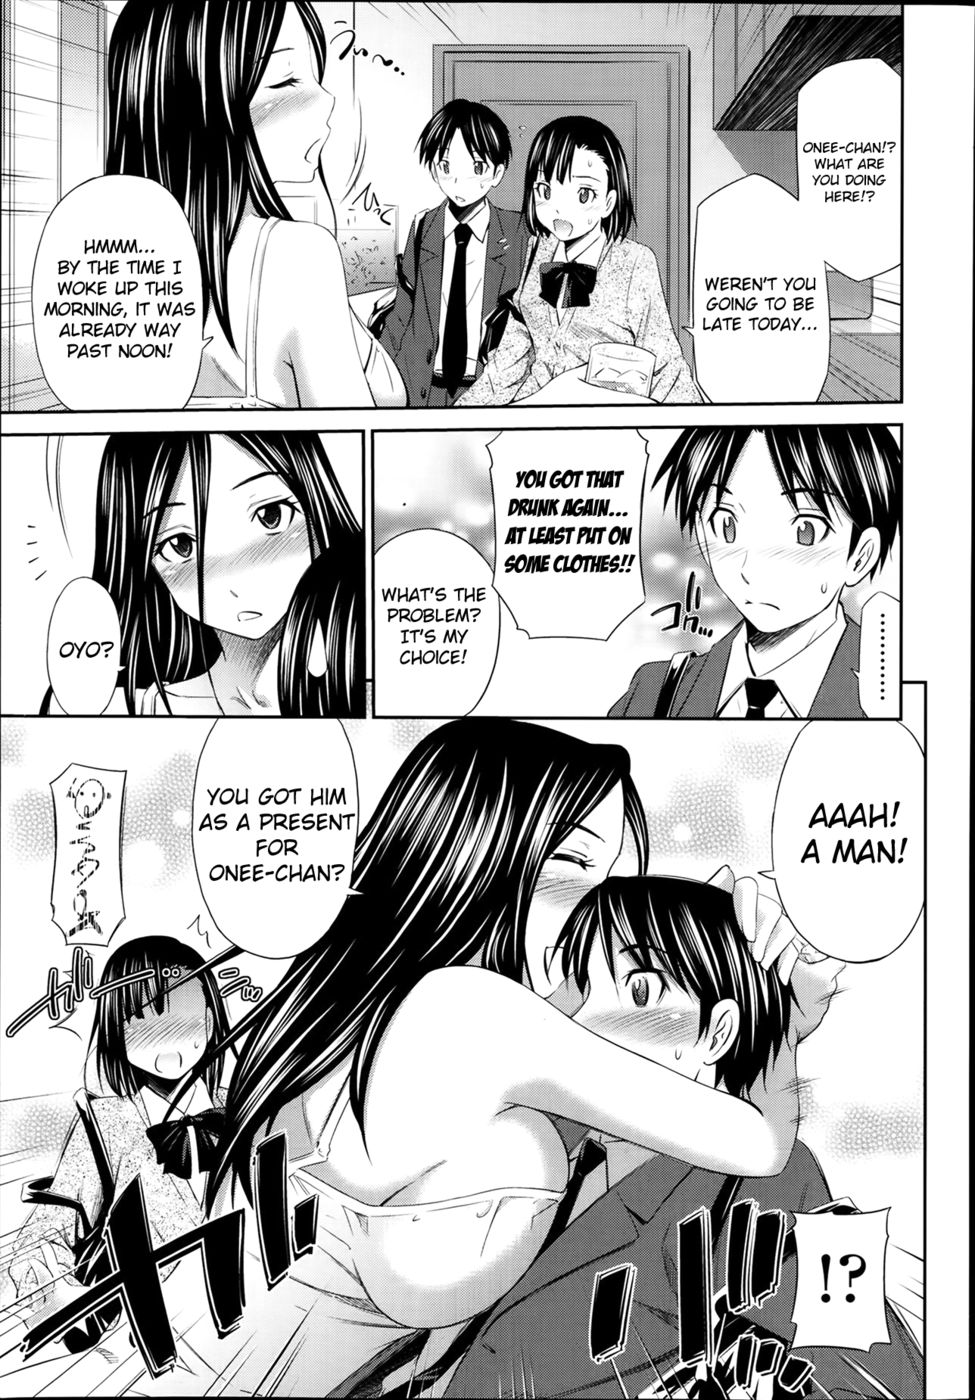 Drunk Sister Porn Cartoon - Drunk Older Sister-Chapter 1-Hentai Manga Hentai Comic - Page: 3 - Online  porn video at mobile